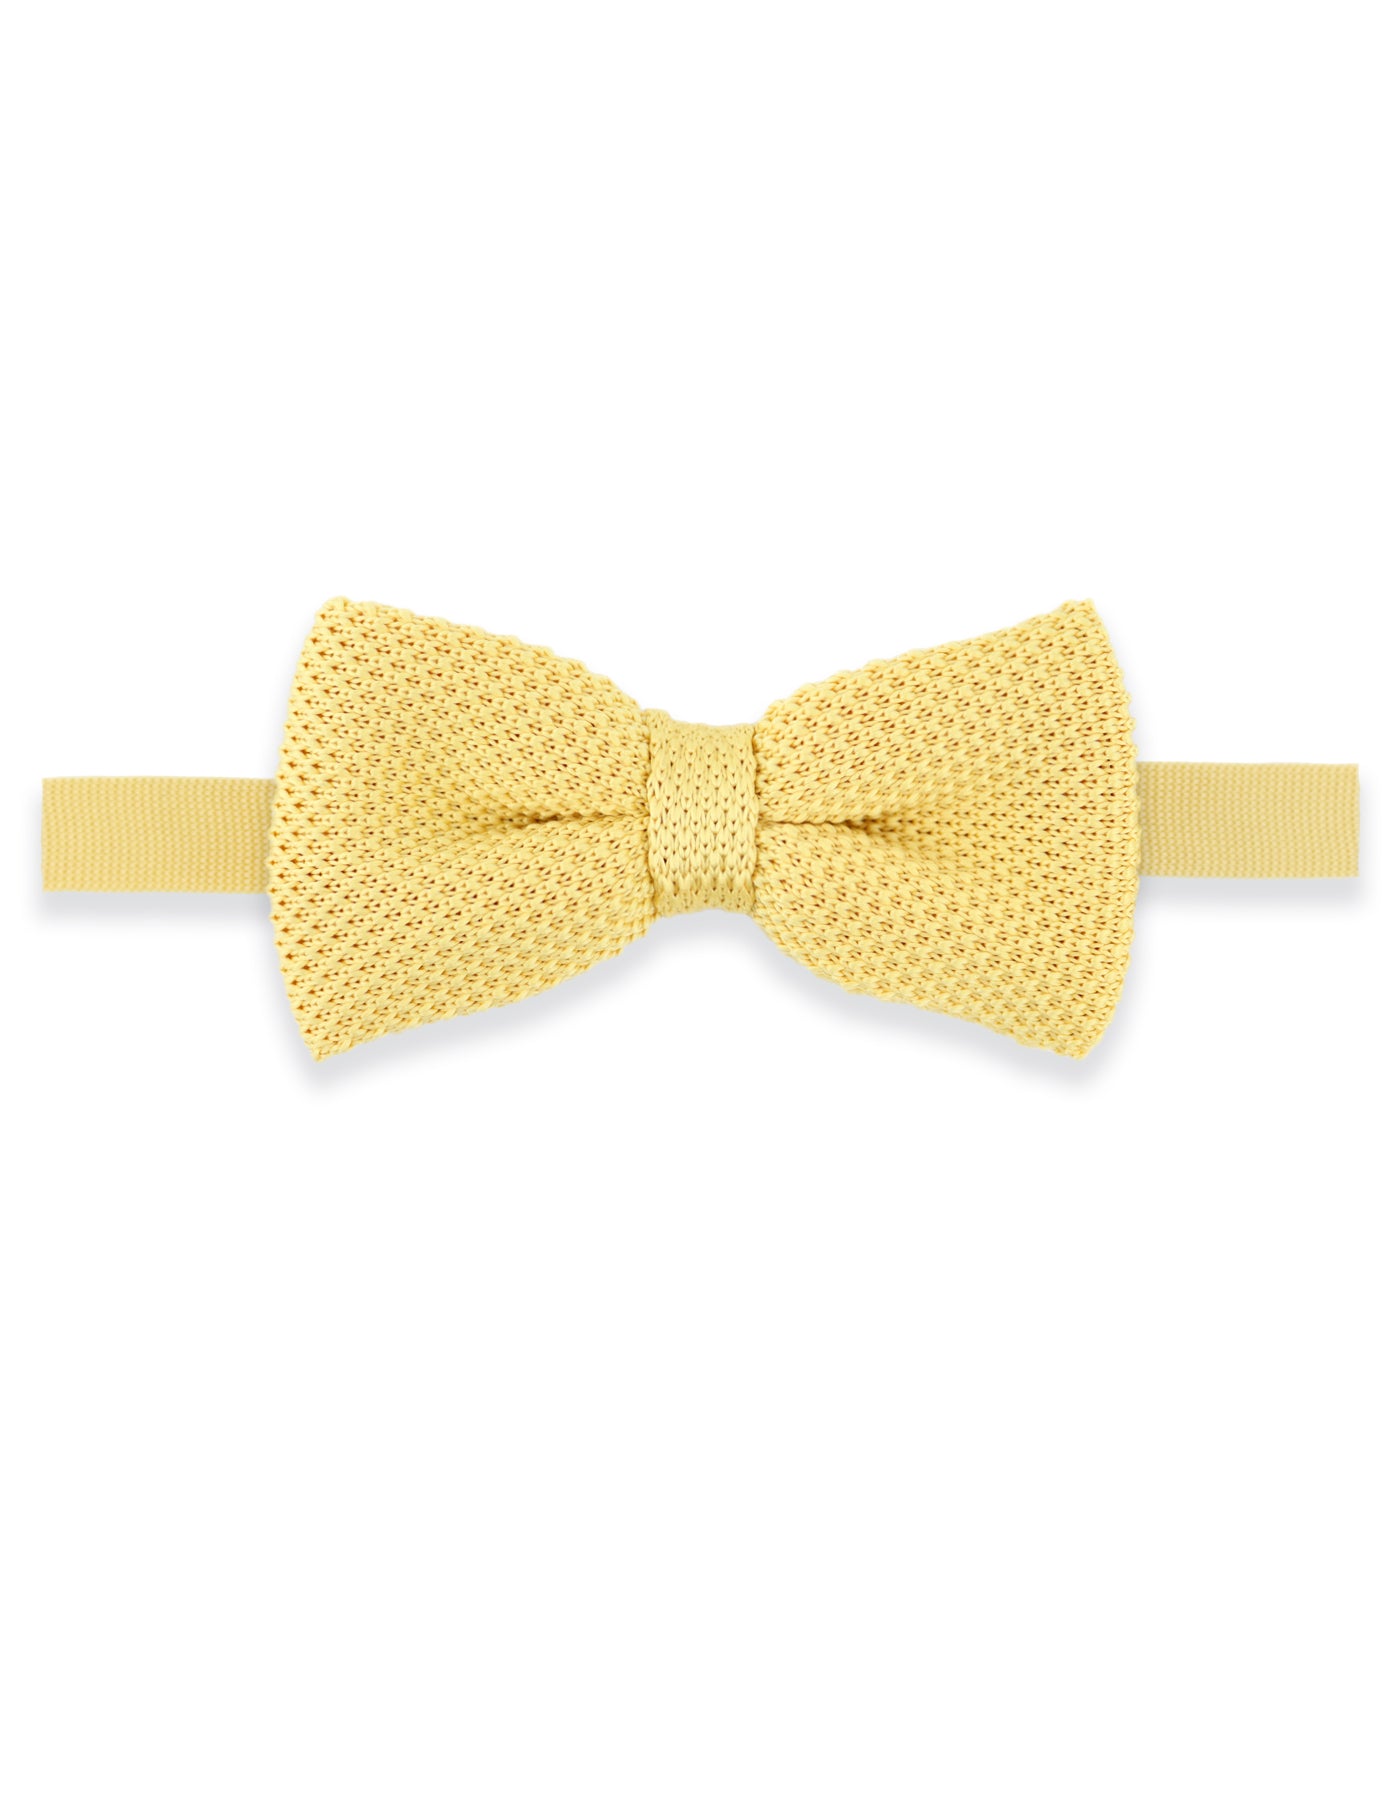 100% Polyester Square End Knitted Tie - Pastel Yellow